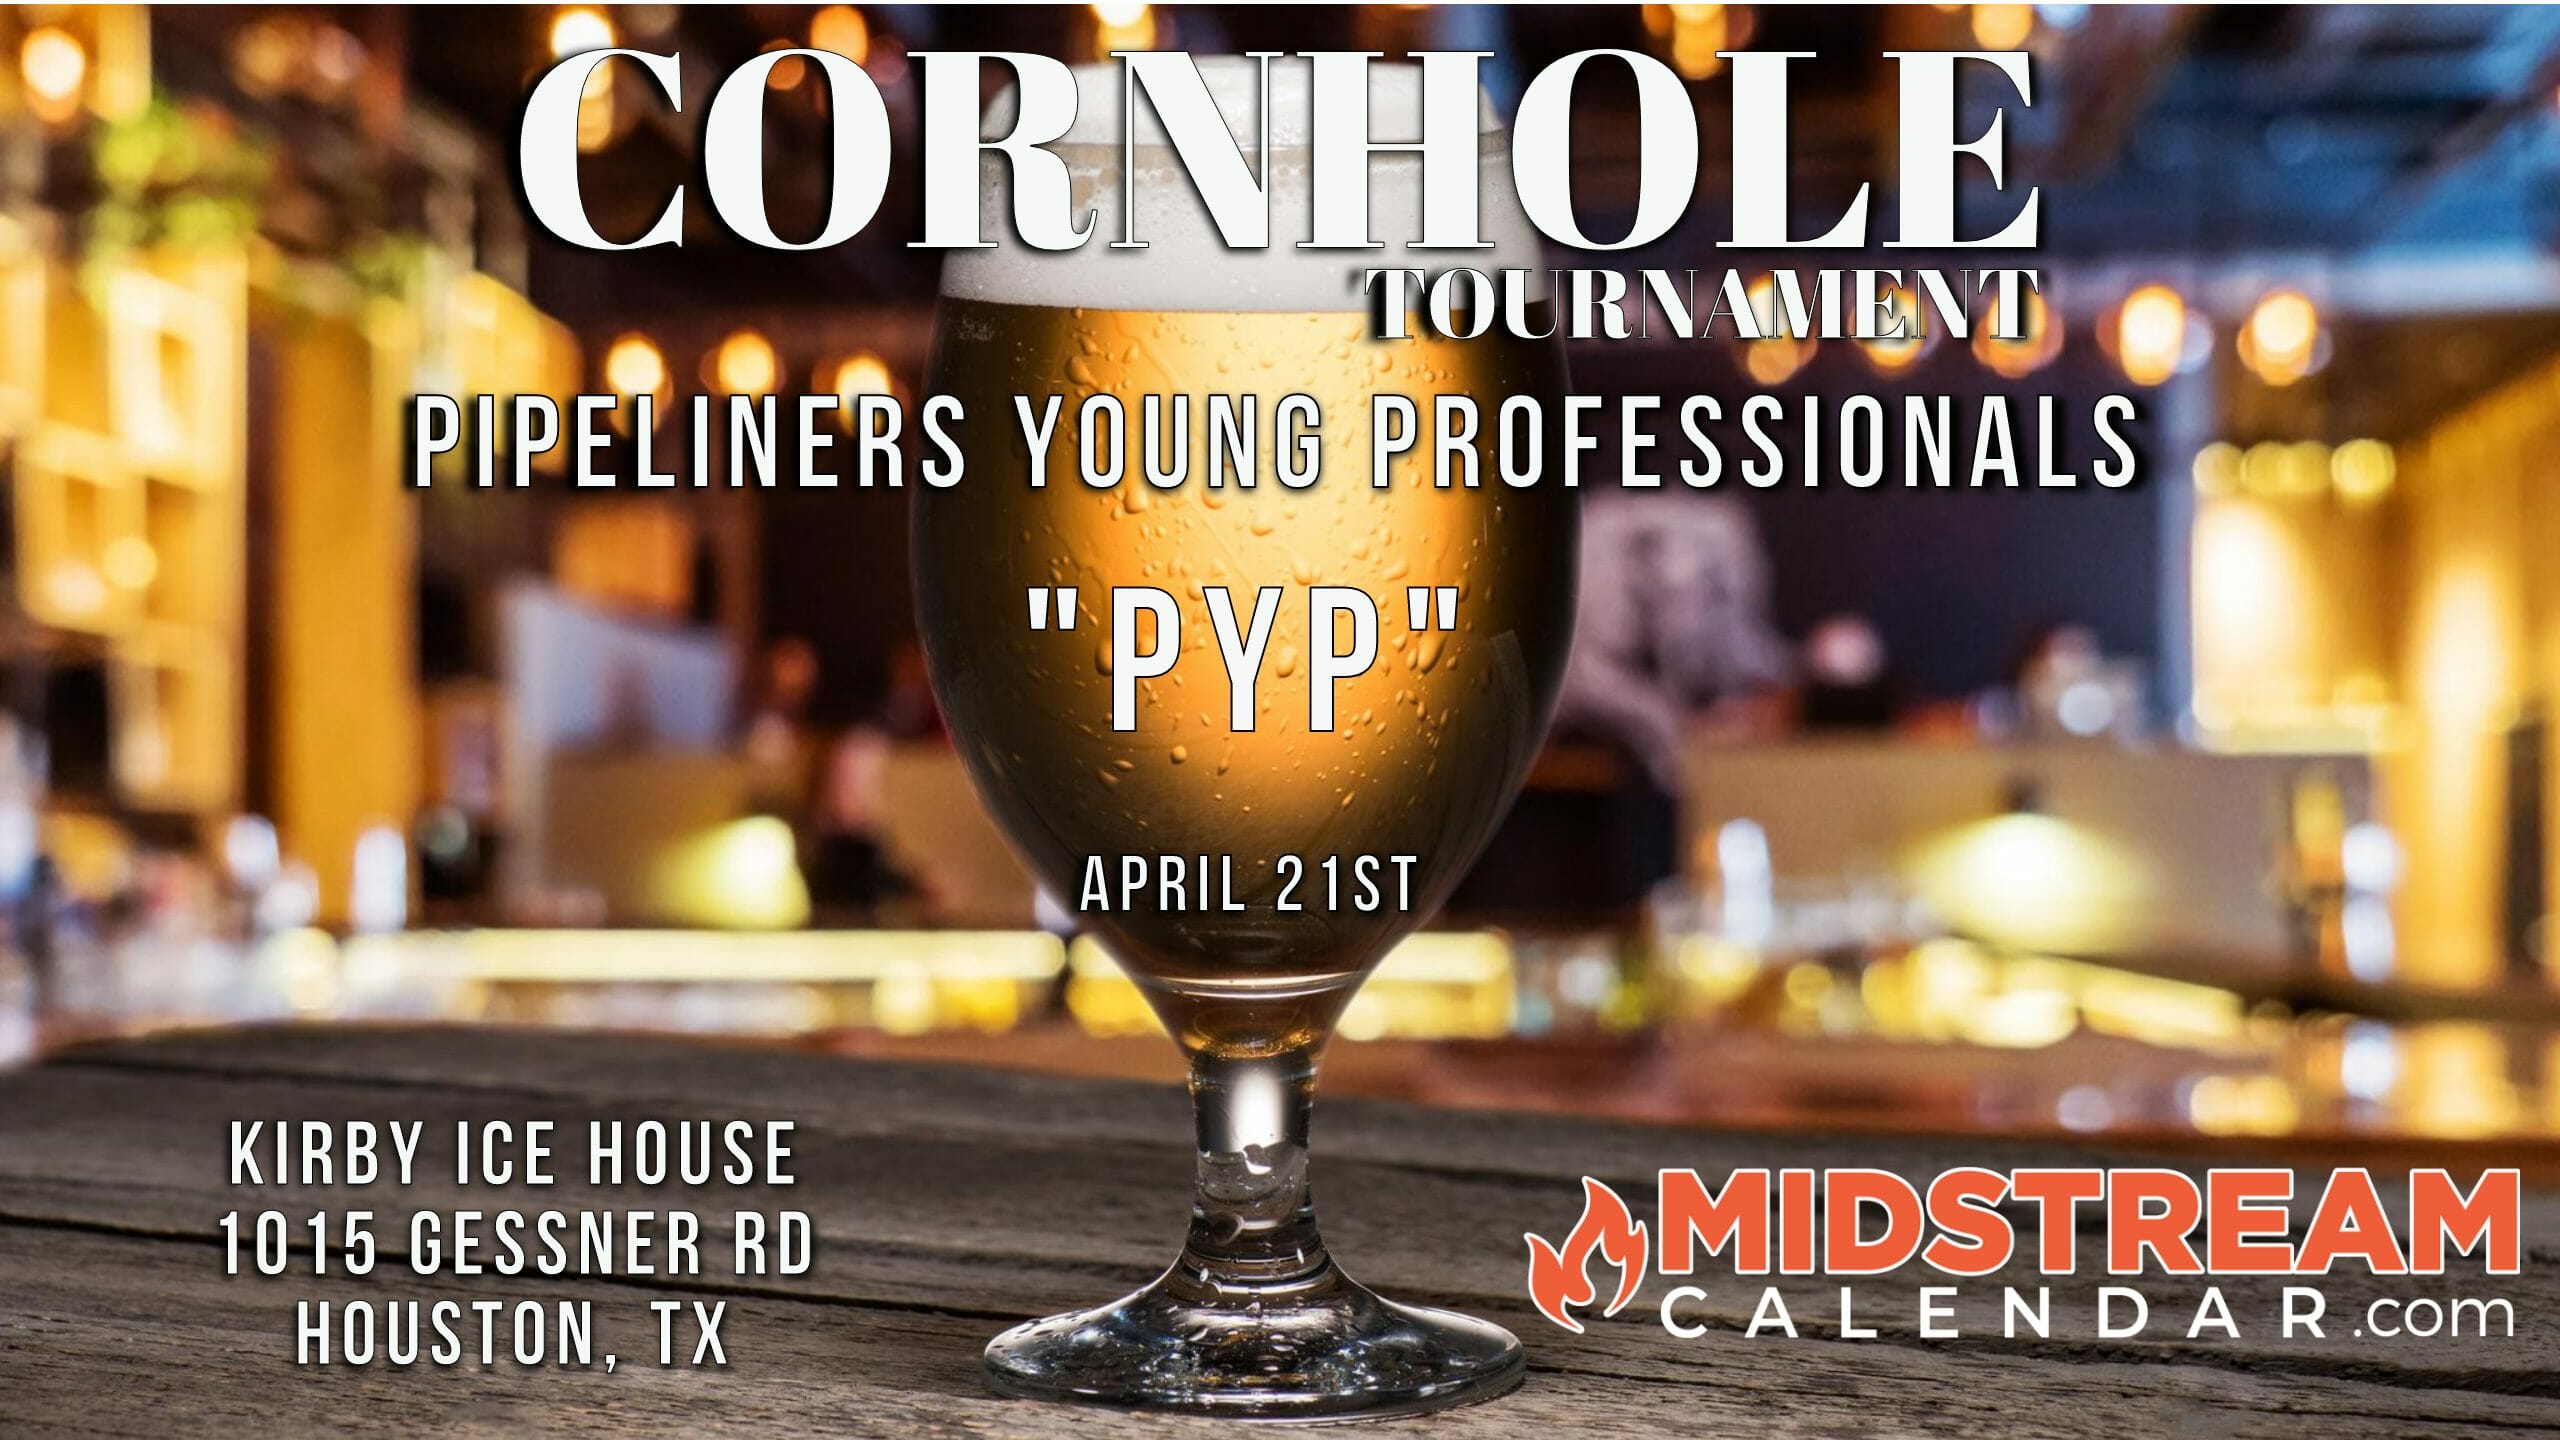 2022 Oil and Gas Events Houston Houston Pipeliners young professionals Shale Magazine